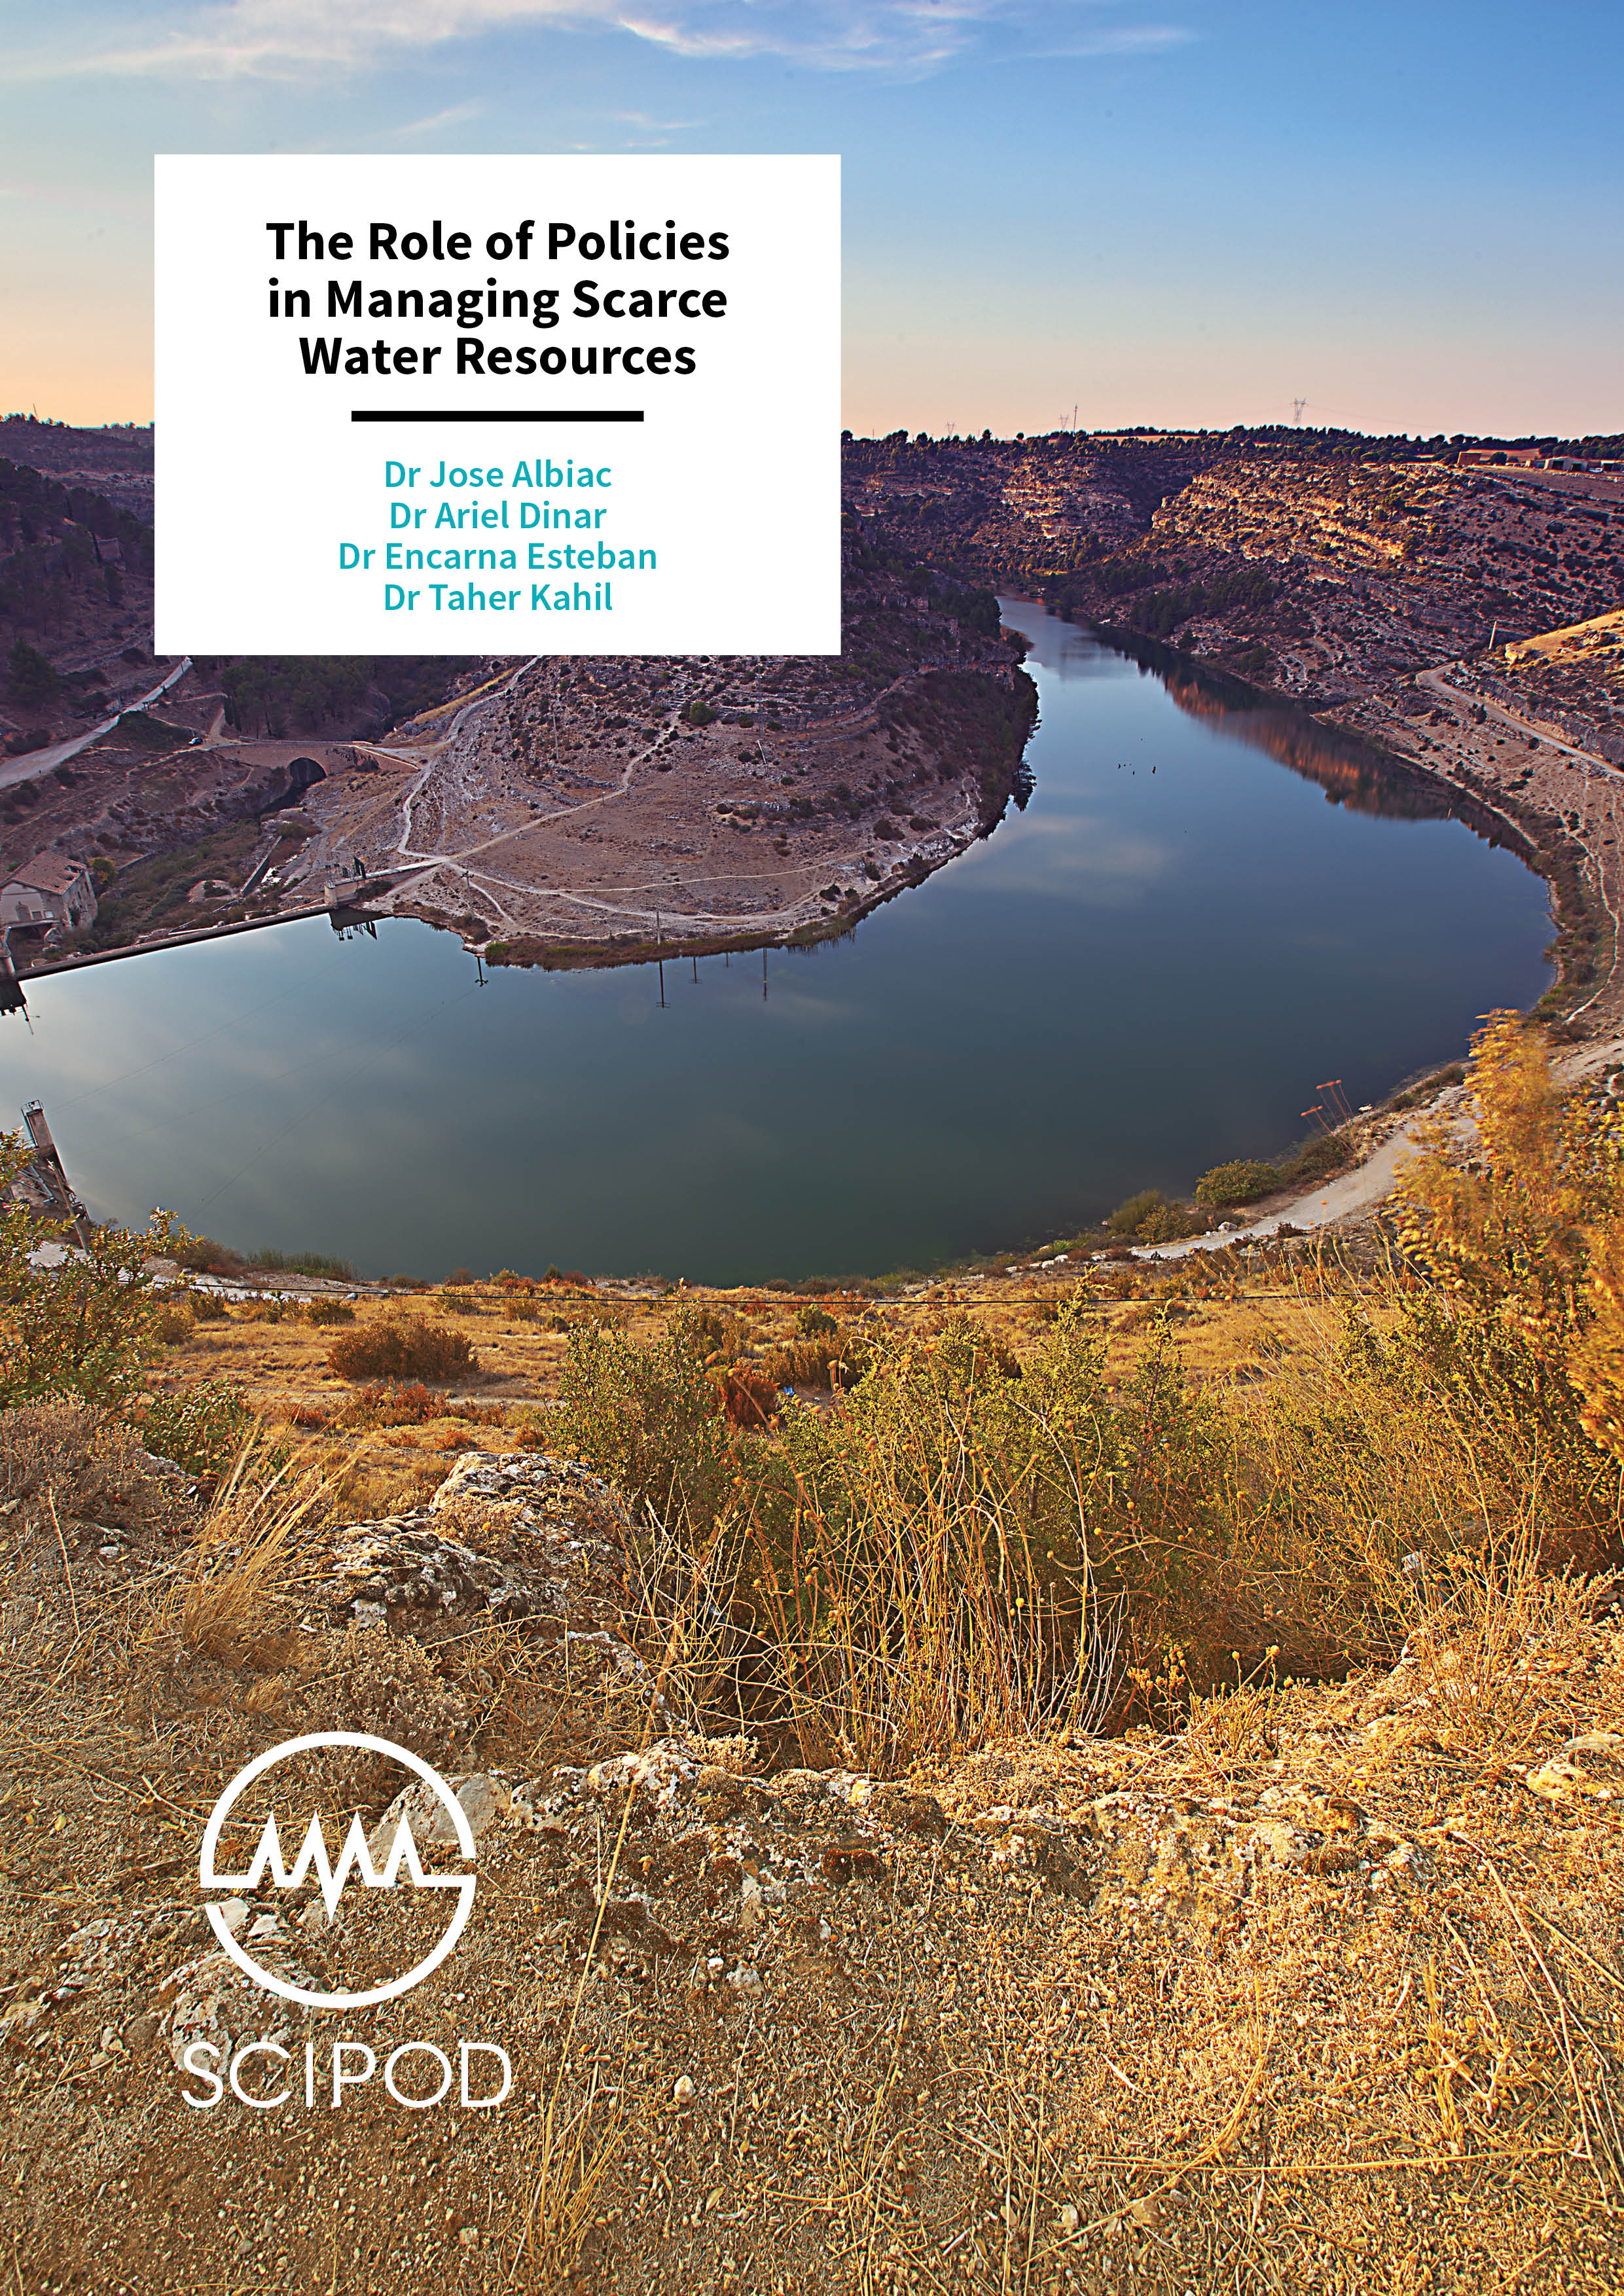 The Role of Policies in Managing Scarce Water Resources – Drs Jose Albiac, Ariel Dinar, Encarna Esteban & Dr Taher Kahil